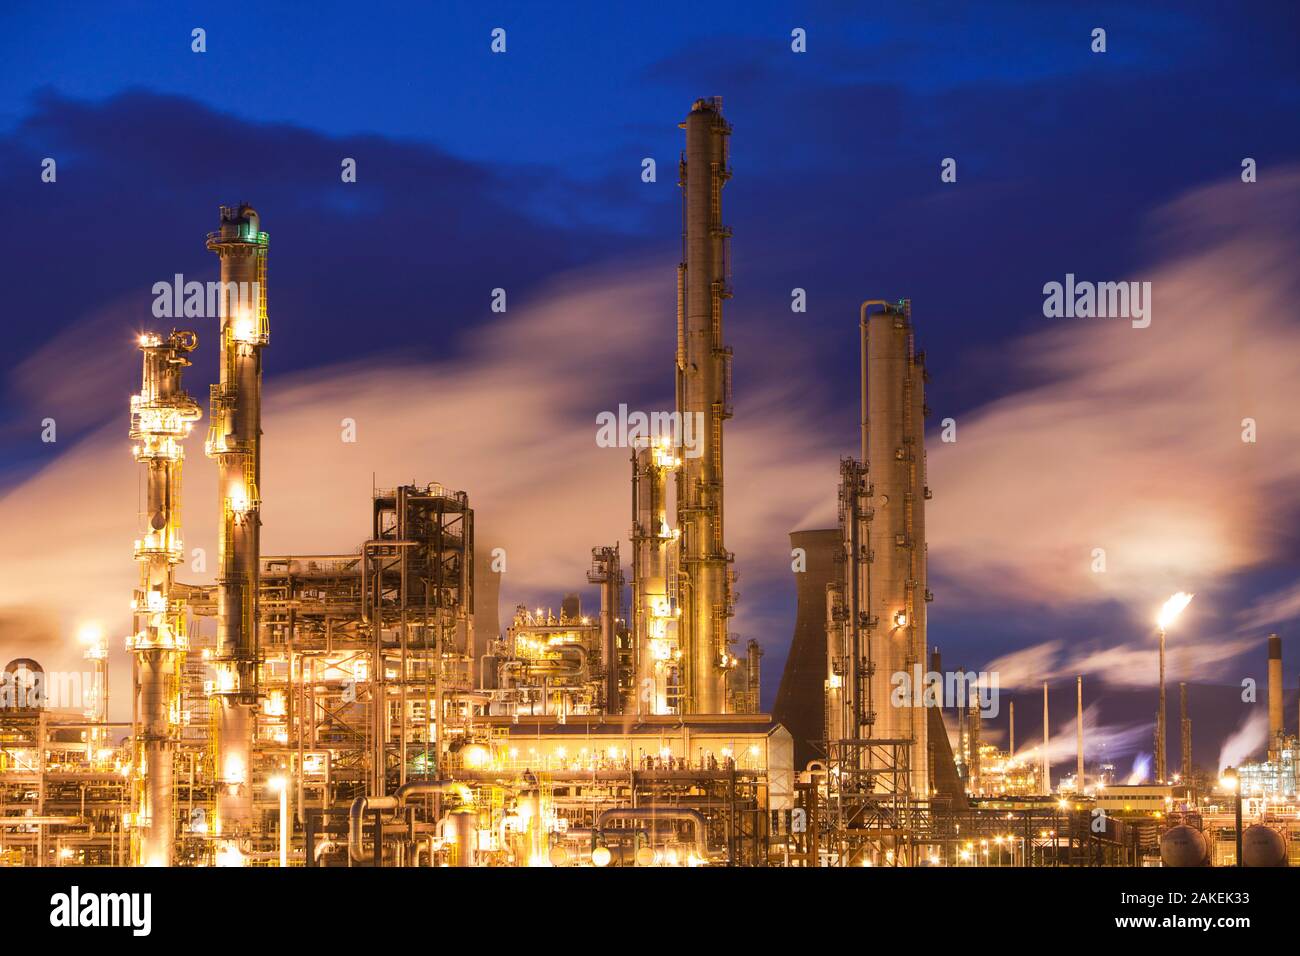 The Ineos oil refinery at Grangemouth in the Firth of Forth, Scotland, UK. October 2010. Stock Photo